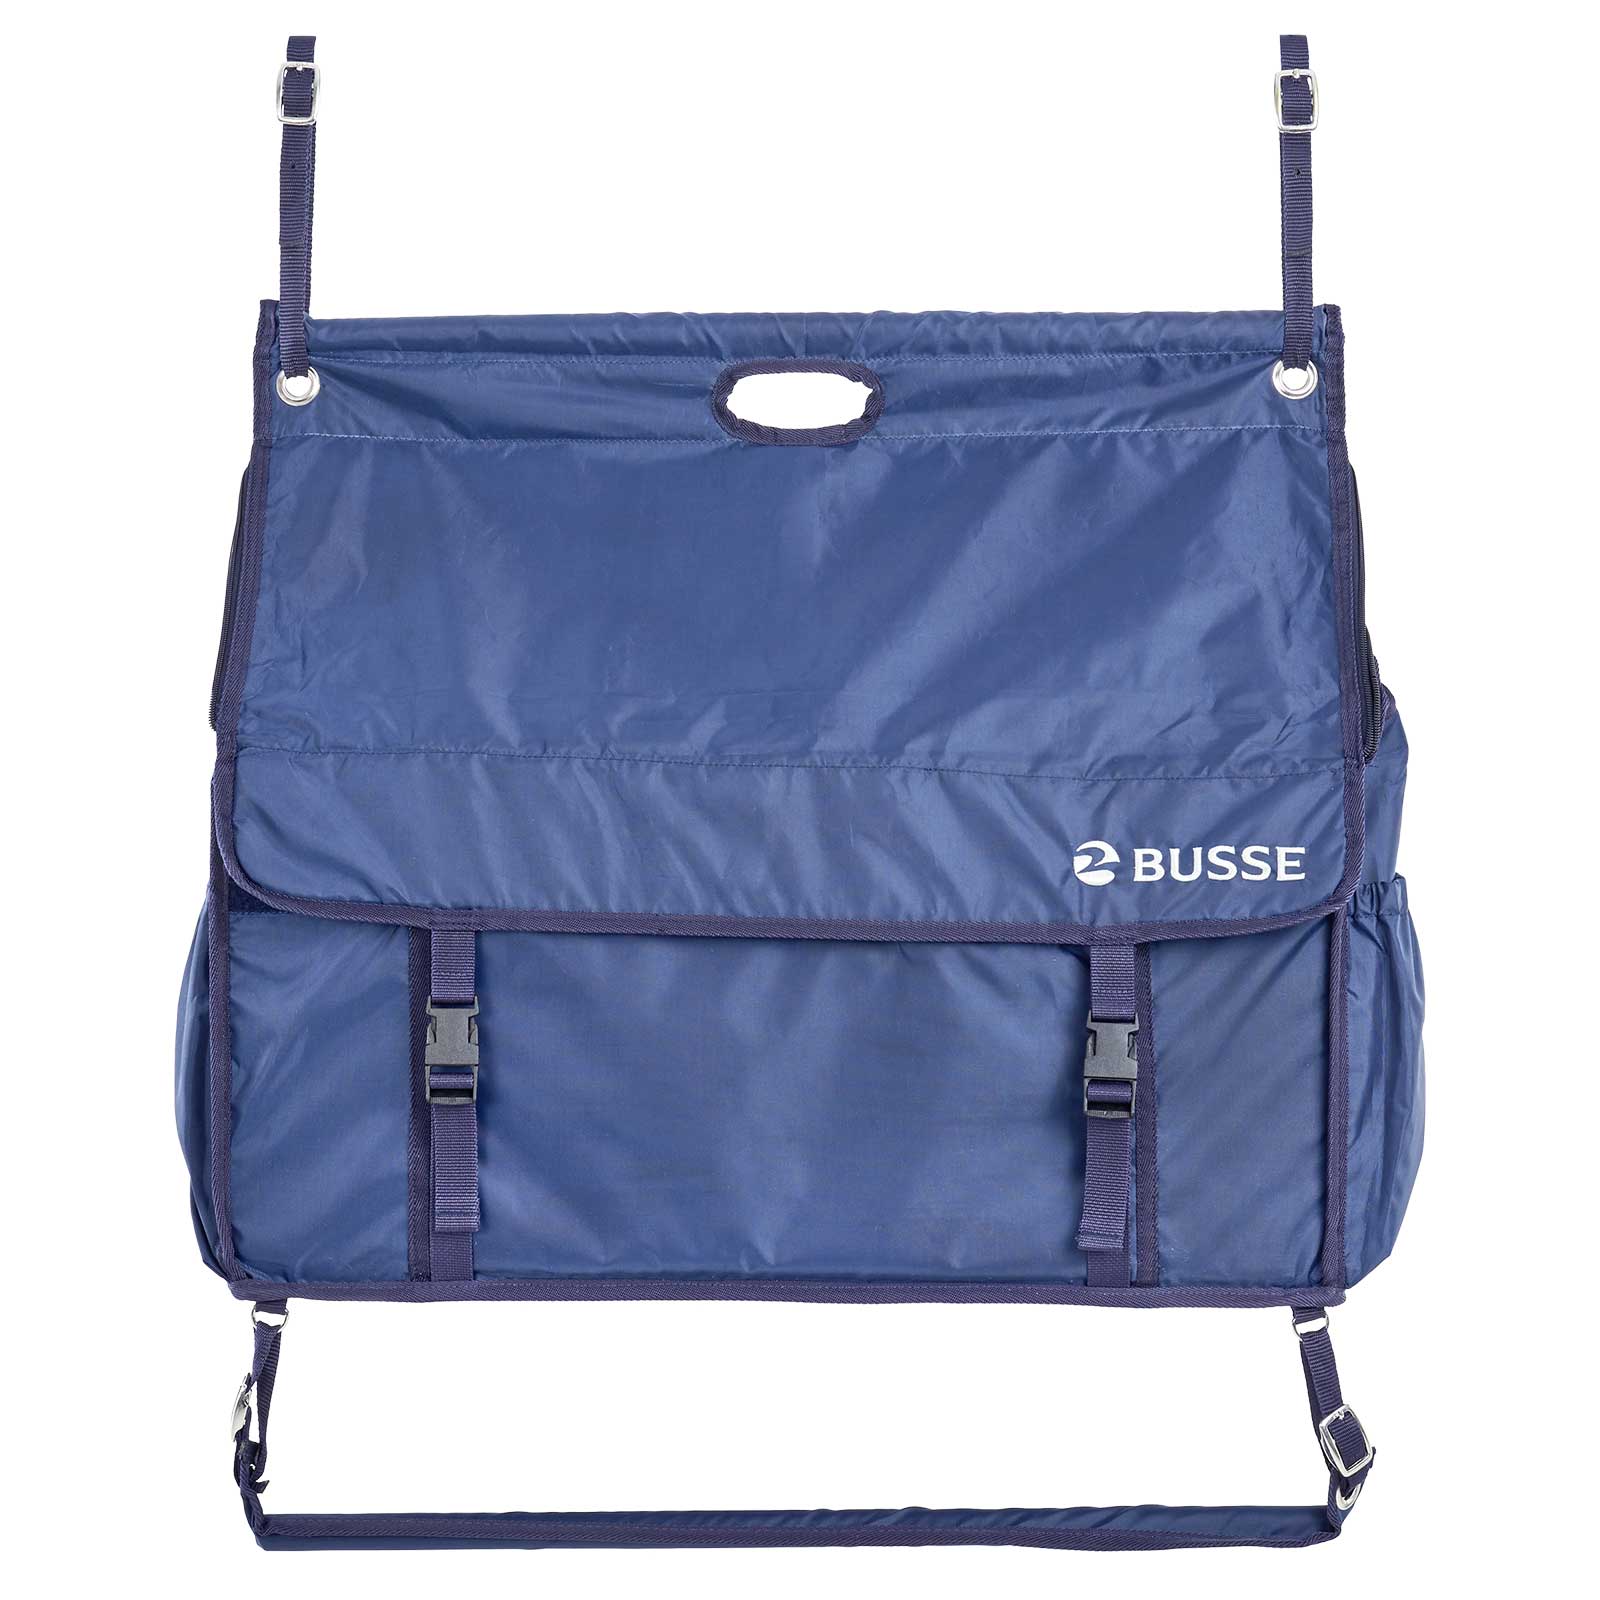 Busse Stable Bag Rio Pro gray